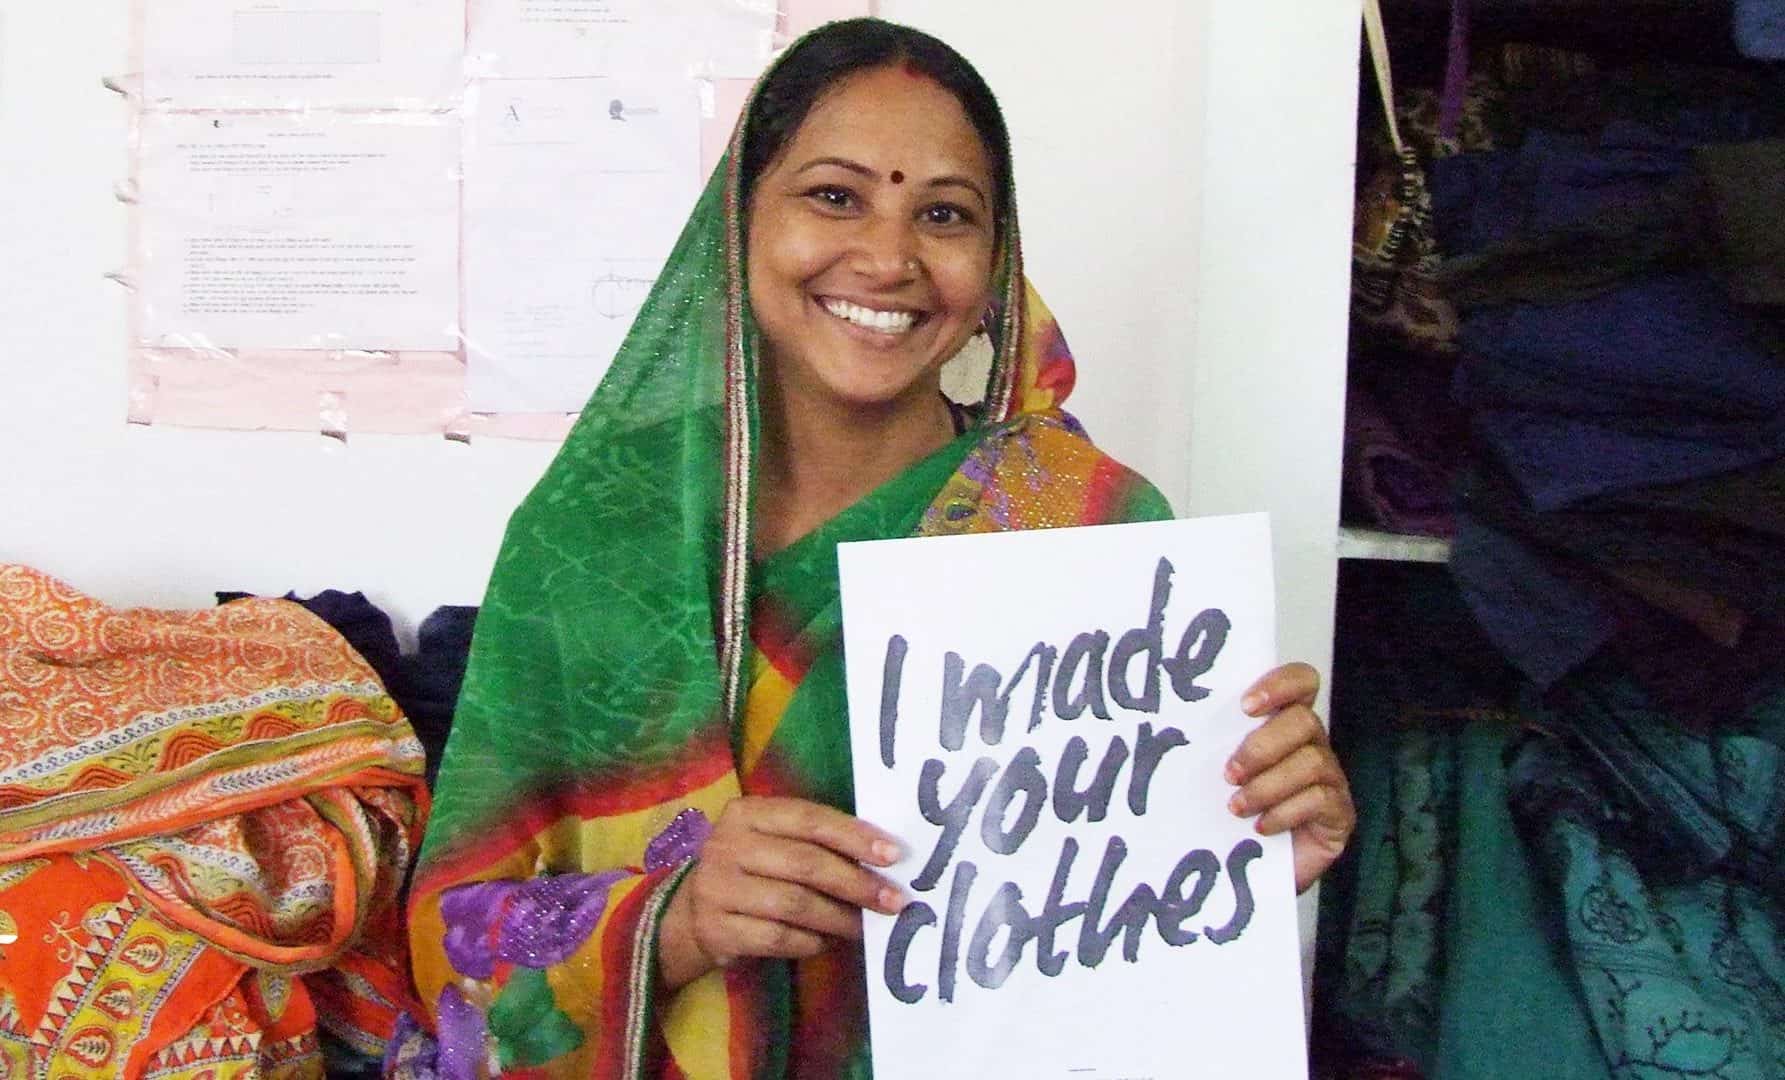 Anchal Project Created A Non-Profit Fashion Company To Empower Women And Change The Textile Industry